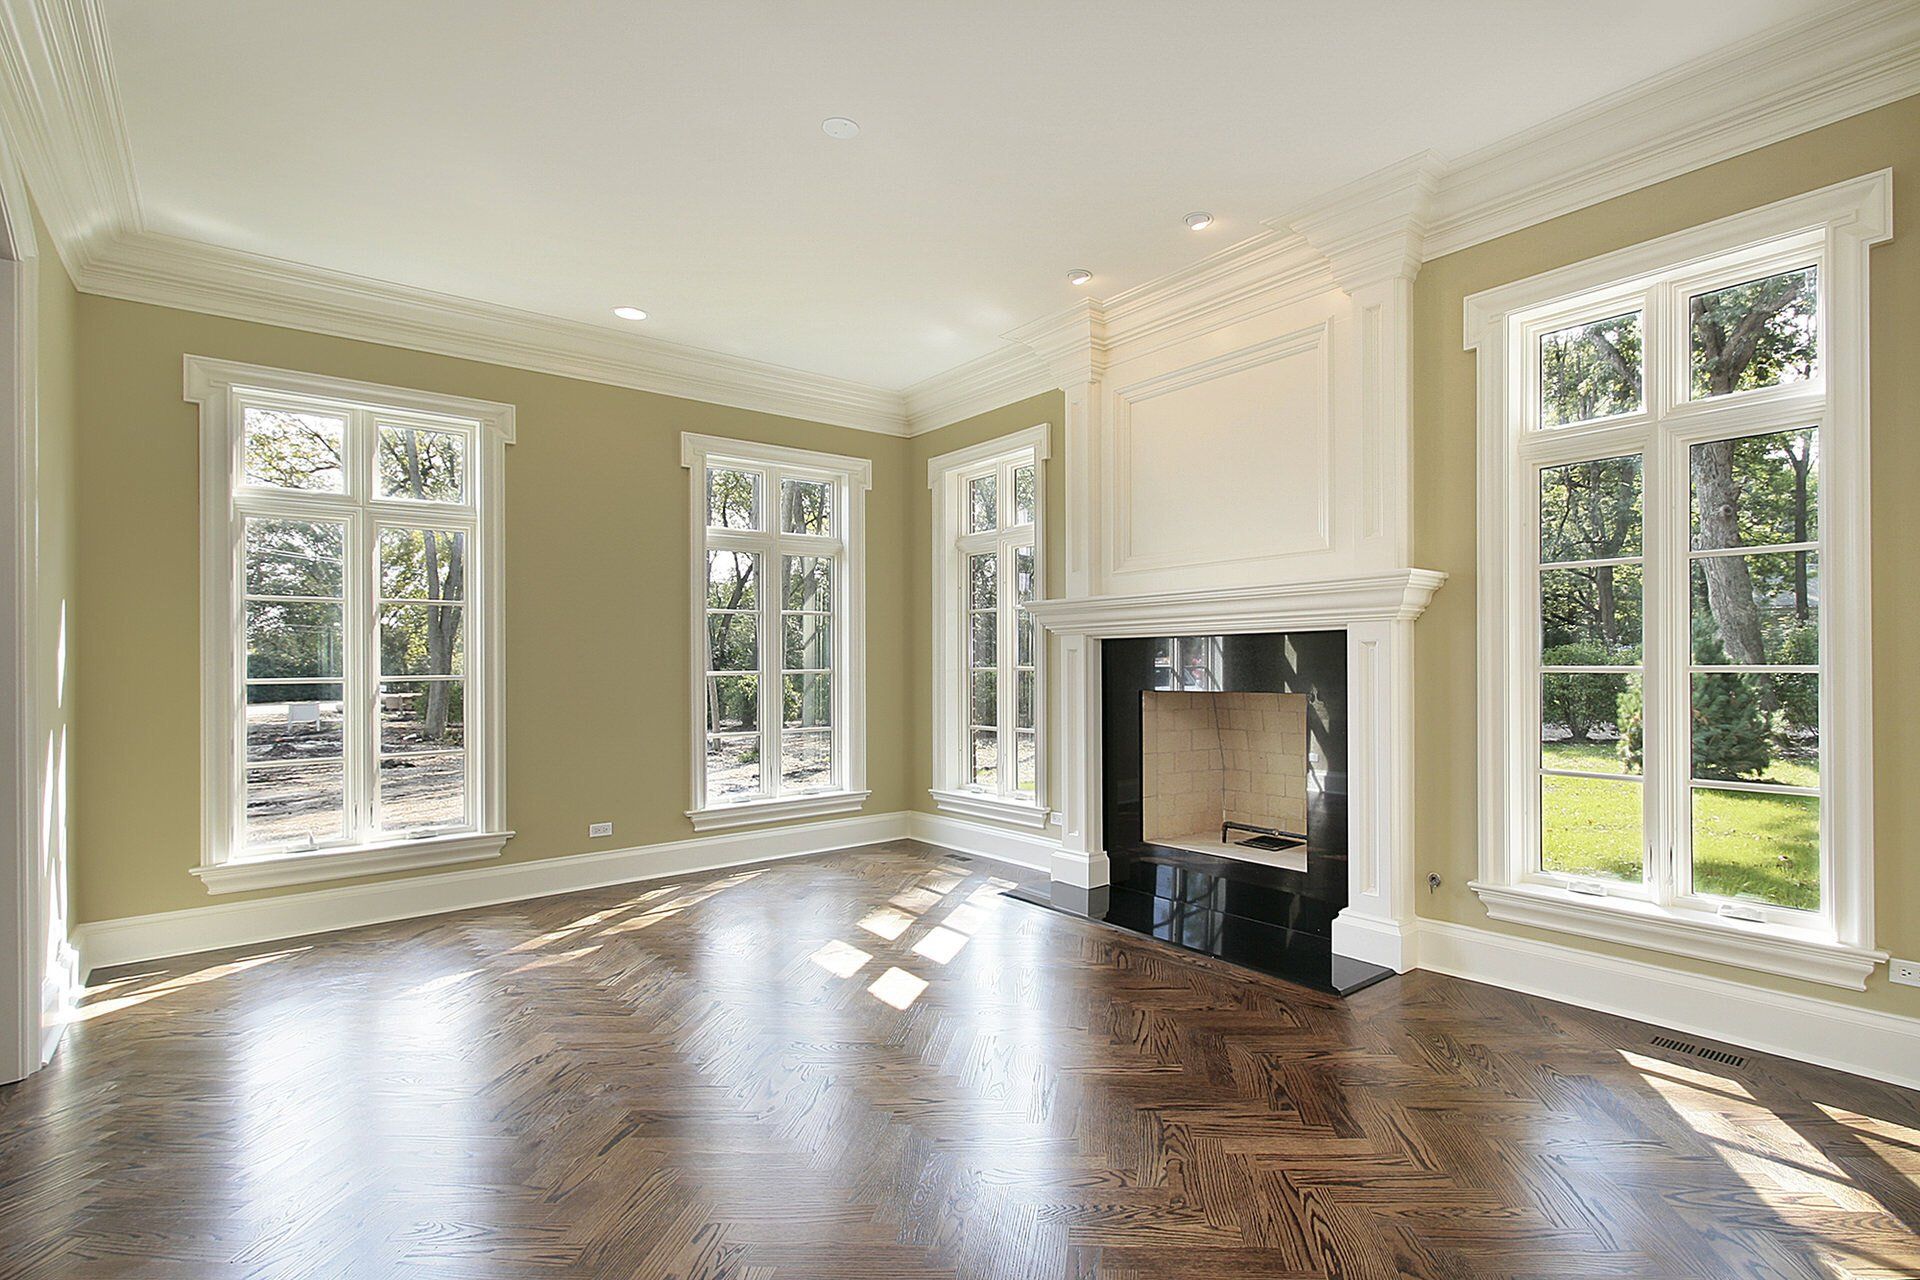 A family room with French style windows.